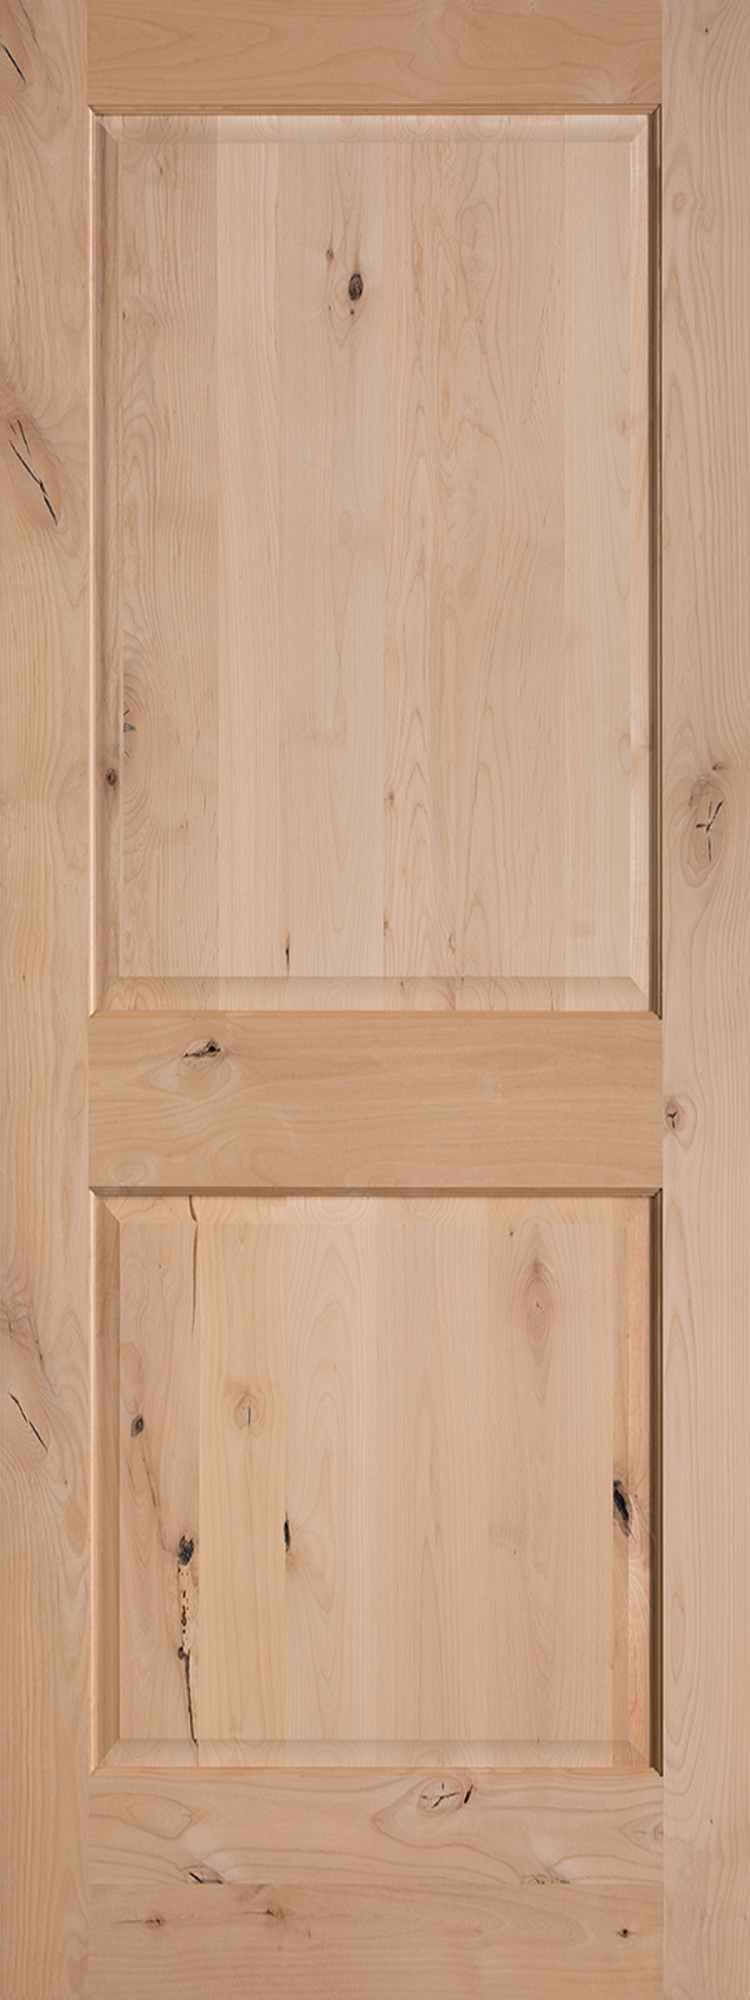 Knotty alder door consists of wood from alder trees with knotted areas within the wood, and a classic two-panel design